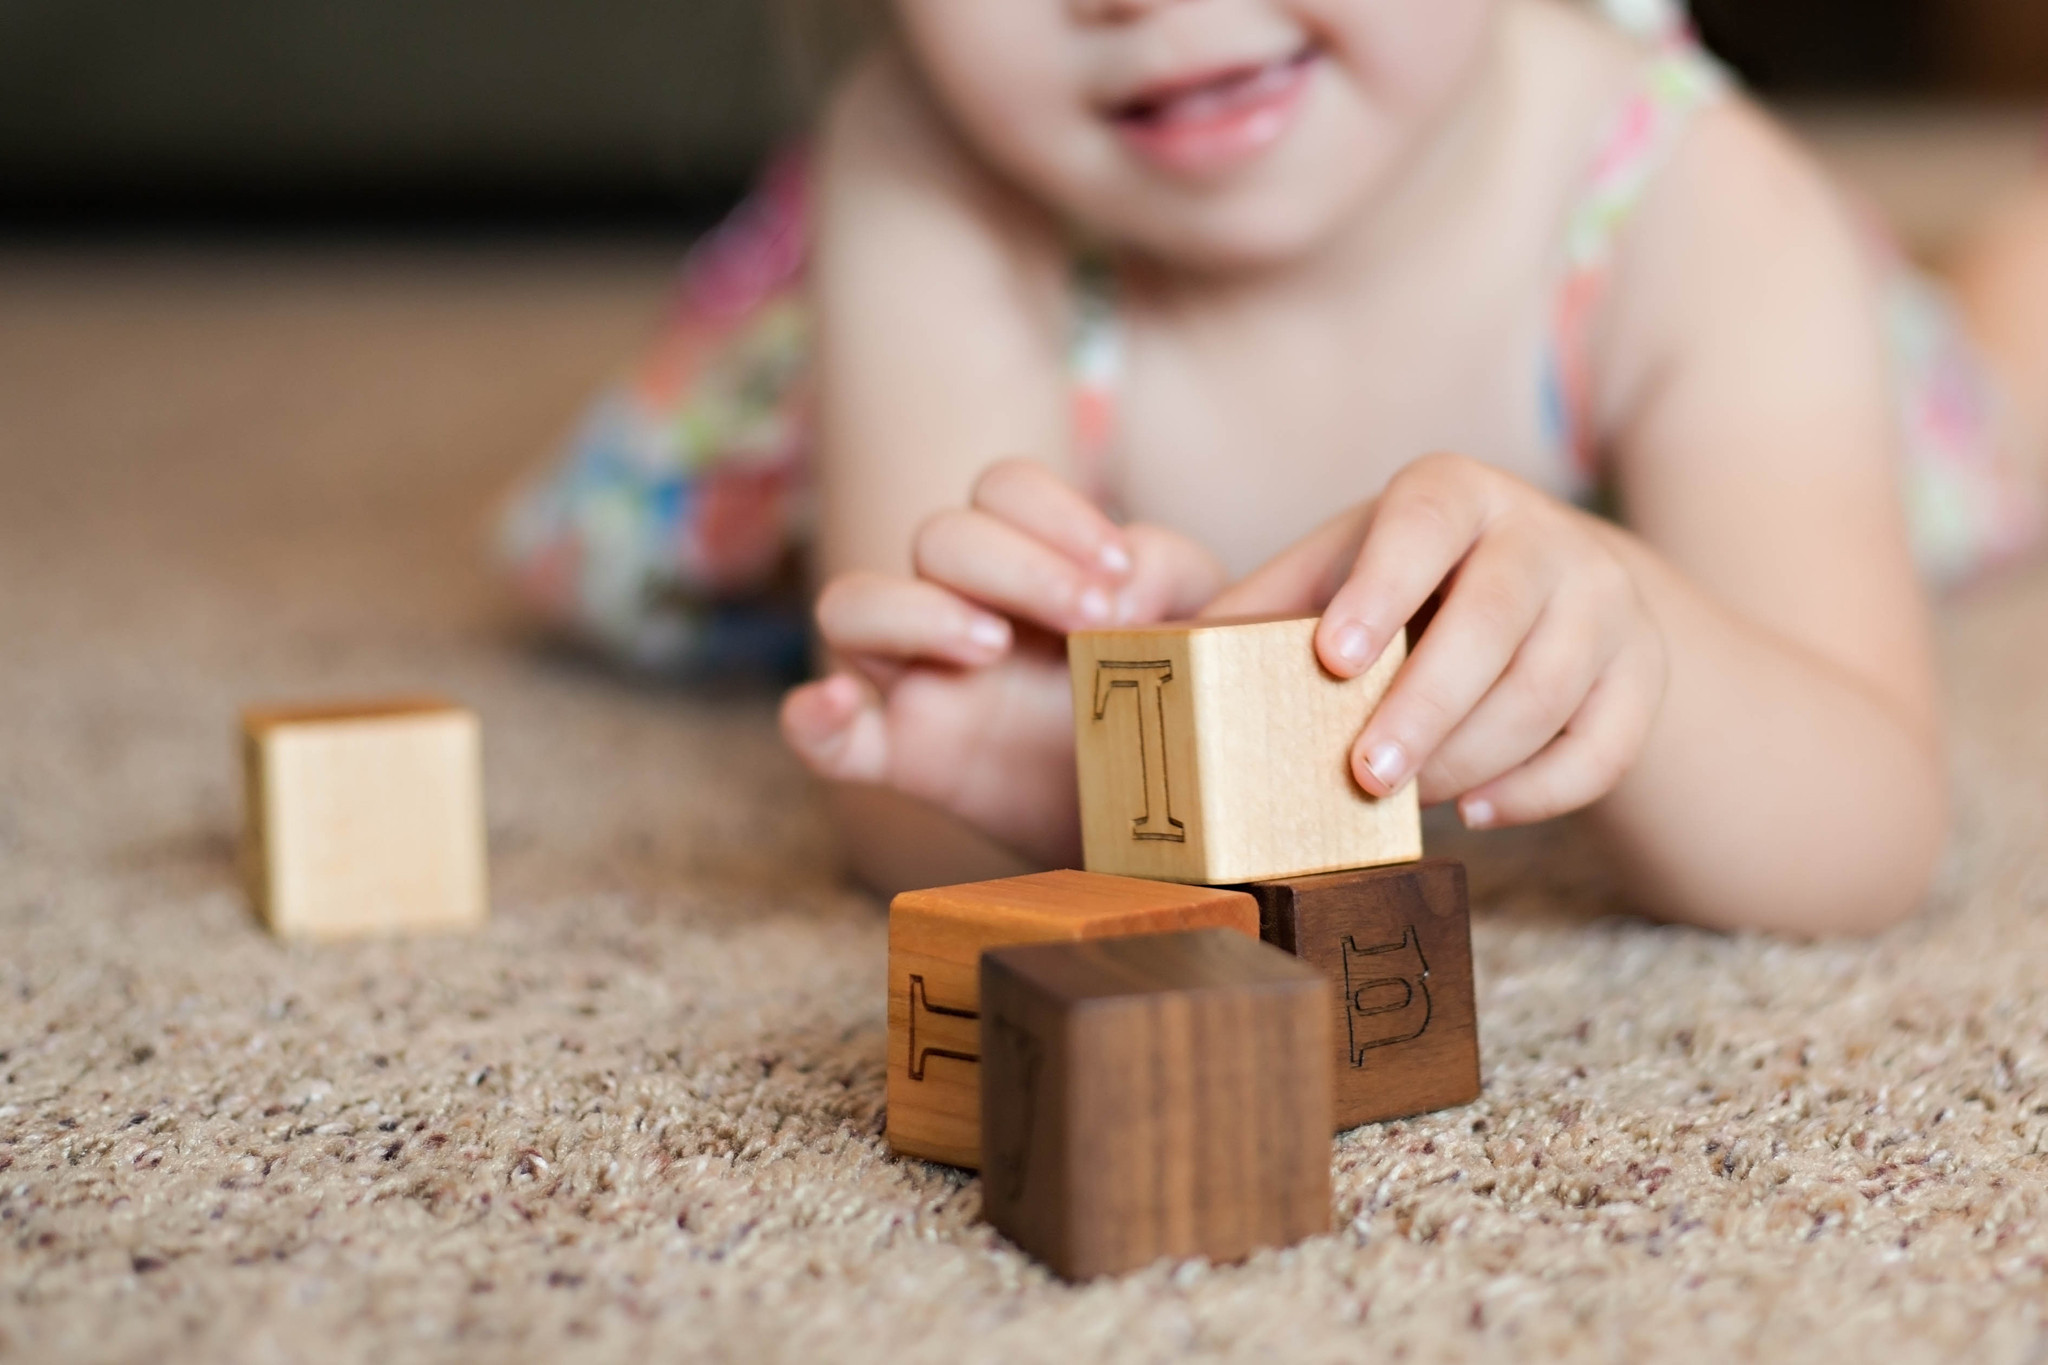 Childrens wooden play blocks are endless, they have